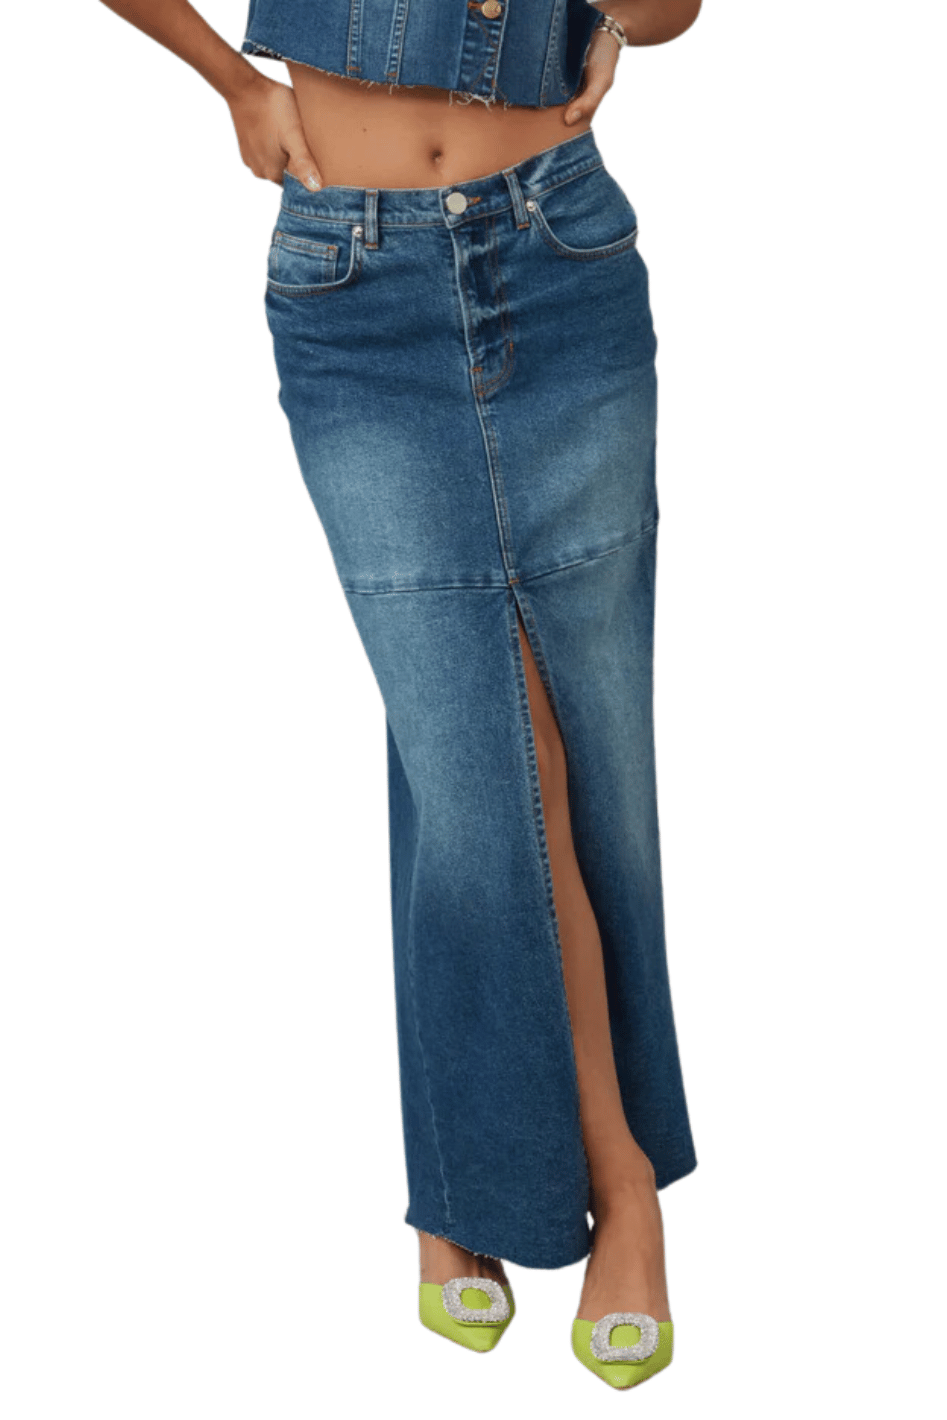 MADLYN High Rise Denim Maxi Skirt - Expressive Collective CO.